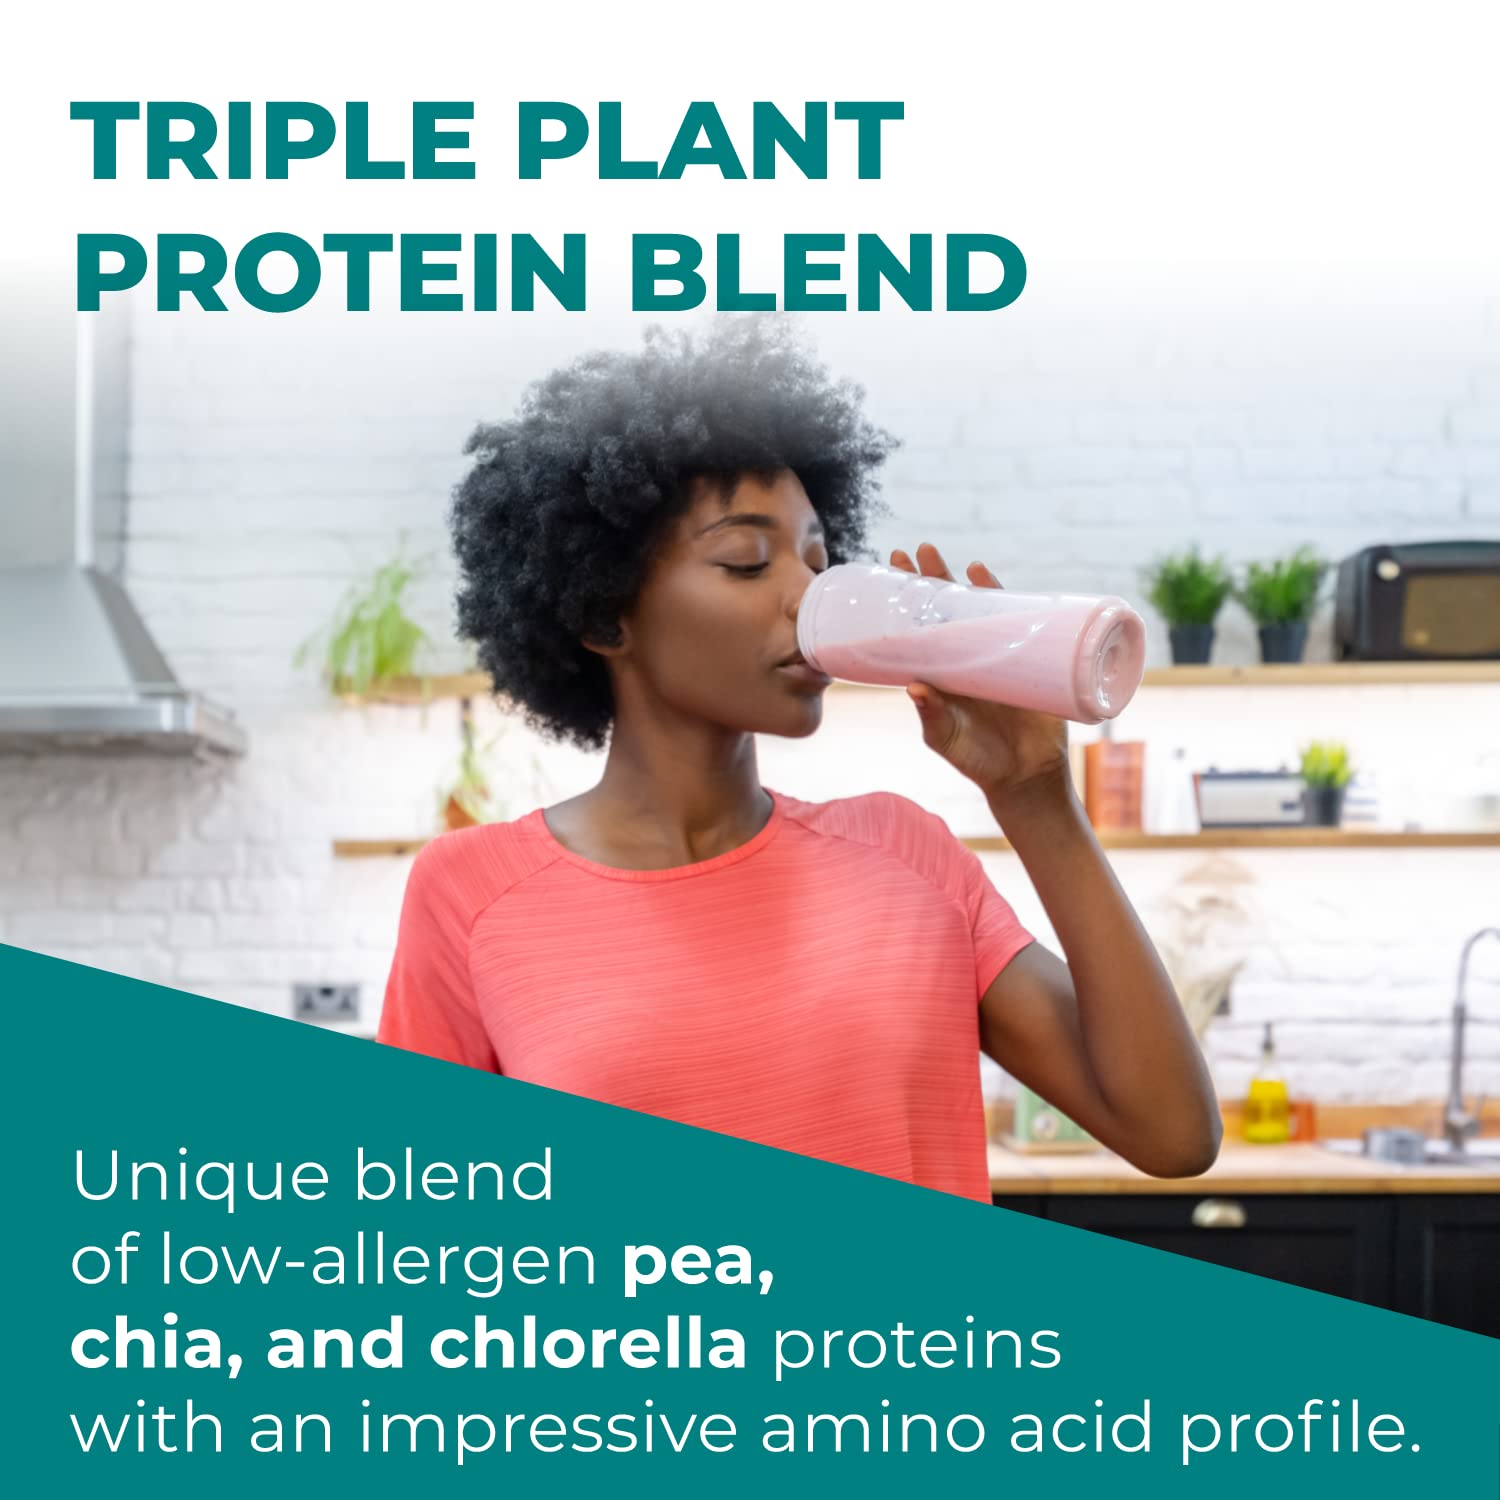 Reignite Wellness by JJ Virgin Chai Plant Based All in 1 Shake - Chia, Chlorella, + Pea Protein Powder - Contains Essential Vitamins & Probiotic Blend to Support Immunity + Gut Health (15 Servings)